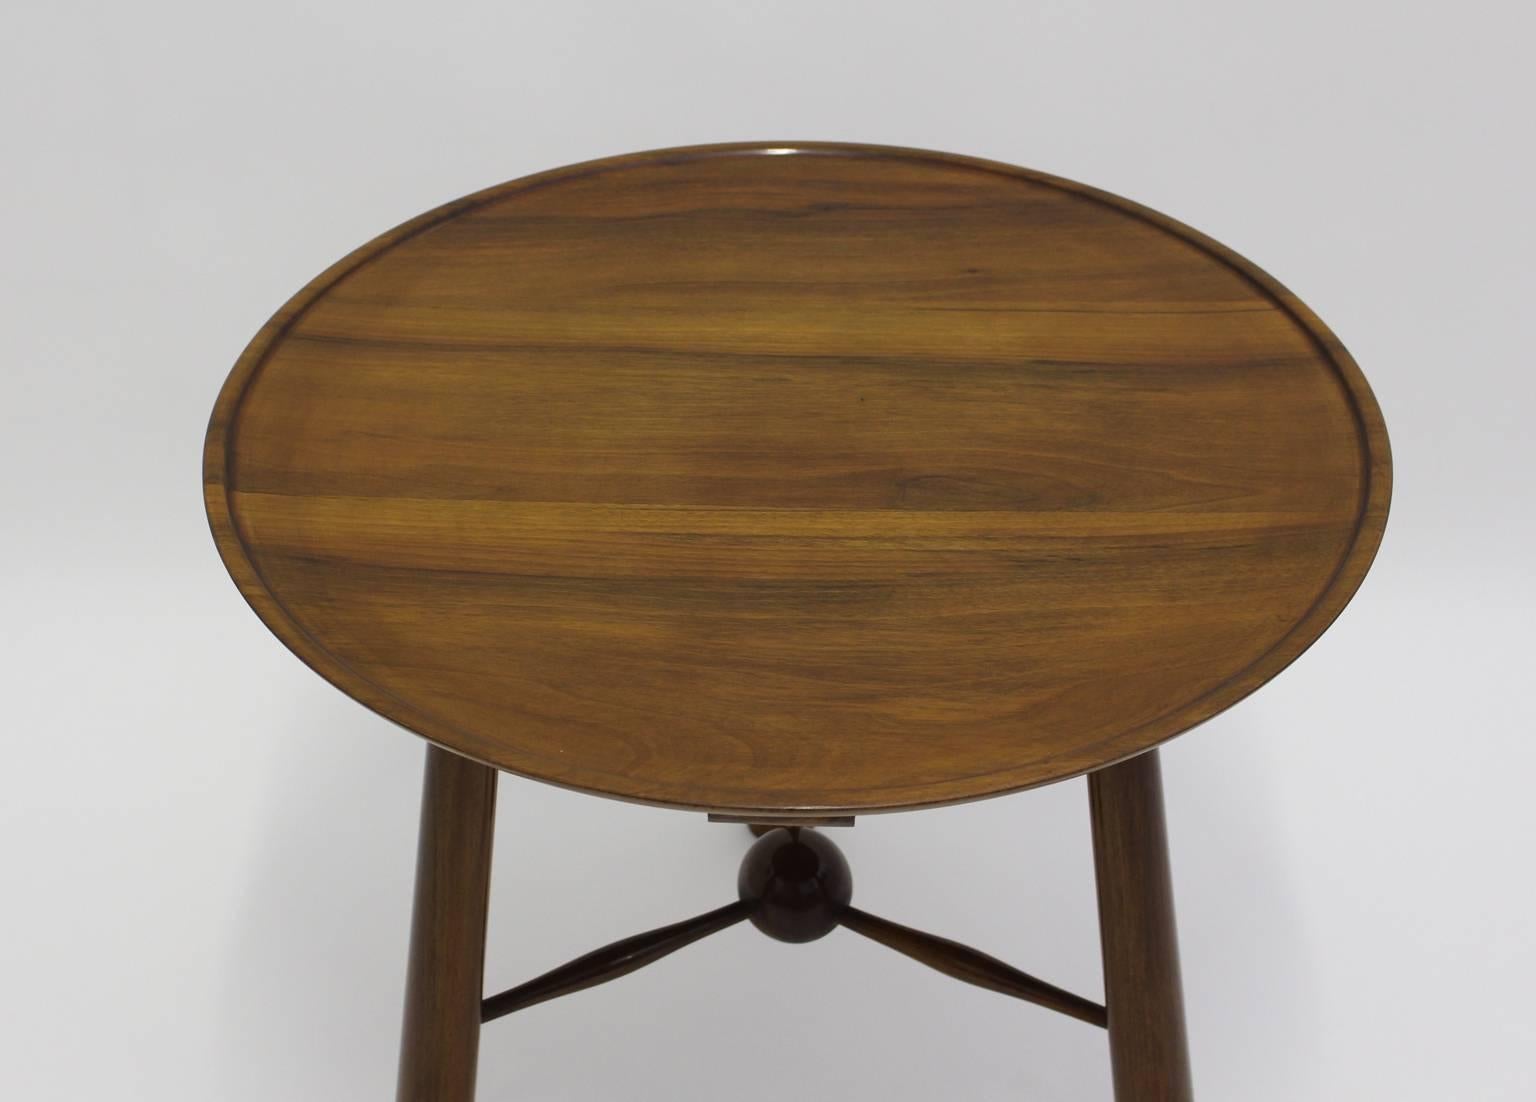 Austrian Art Deco Wood Coffee Table Circle Josef Frank by Walter Sobotka Austria 1930s For Sale